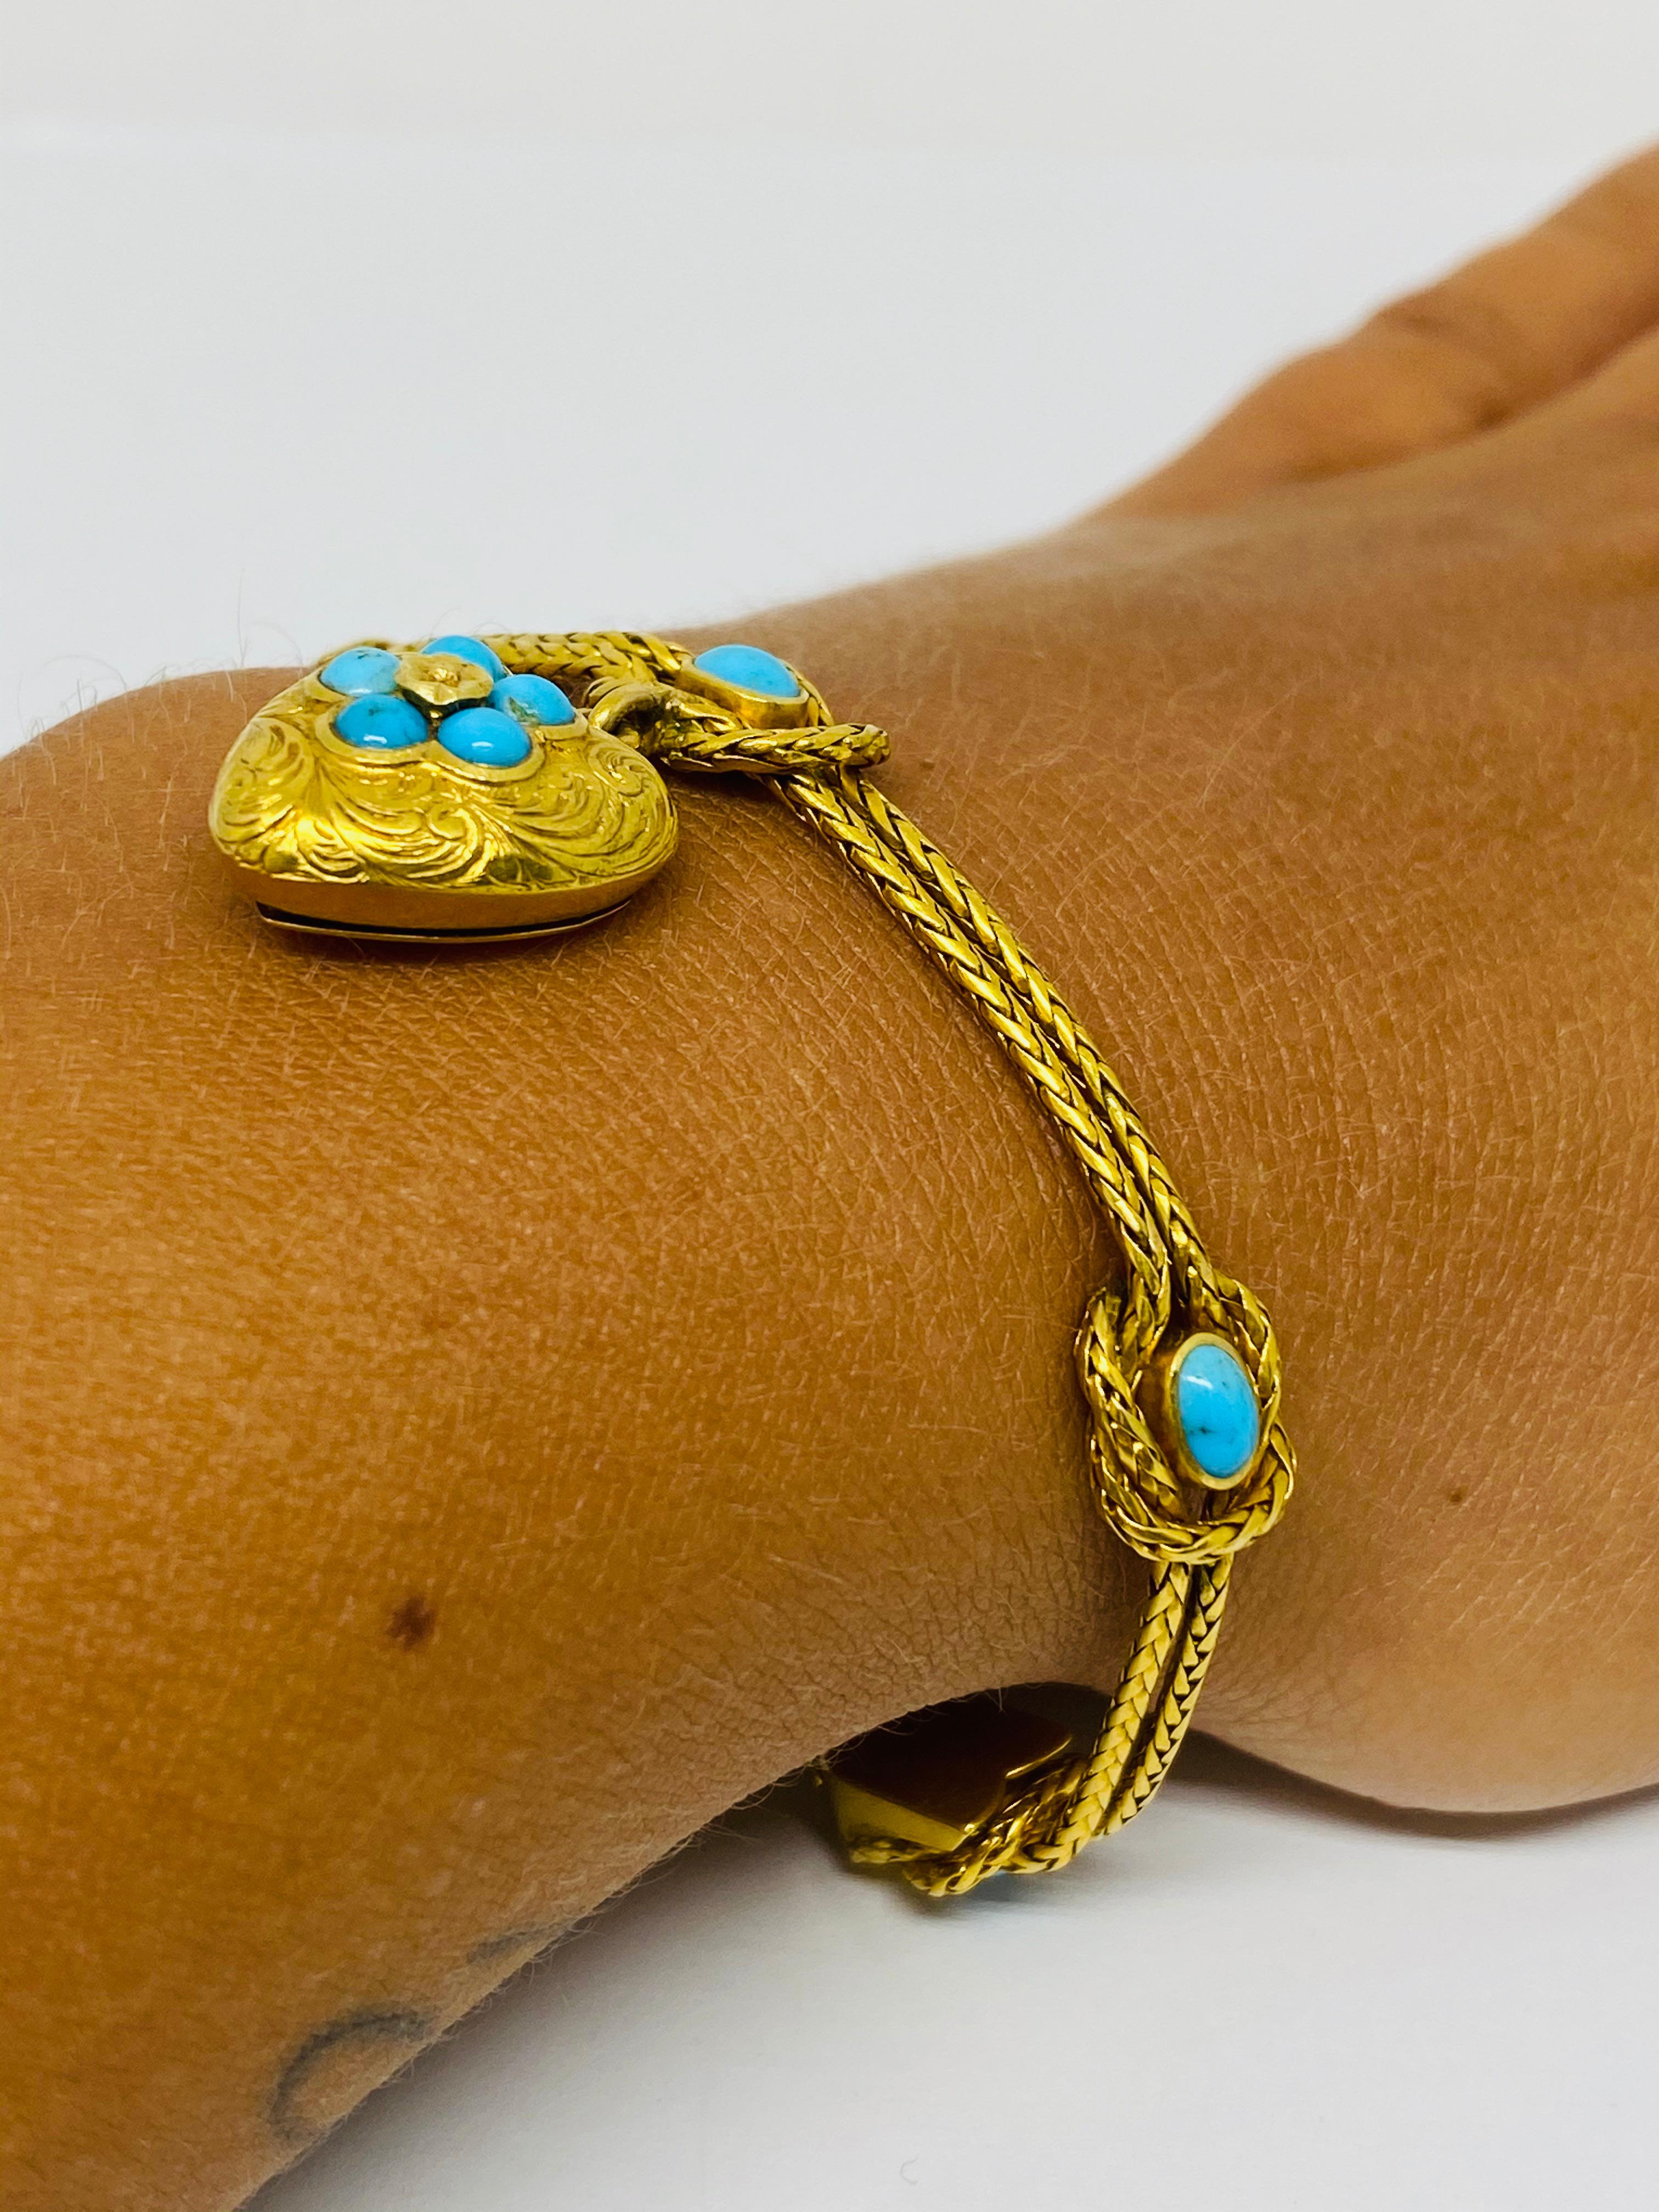 Antique Yellow Gold and Turquoise Bracelet w/ Heart Charm  6